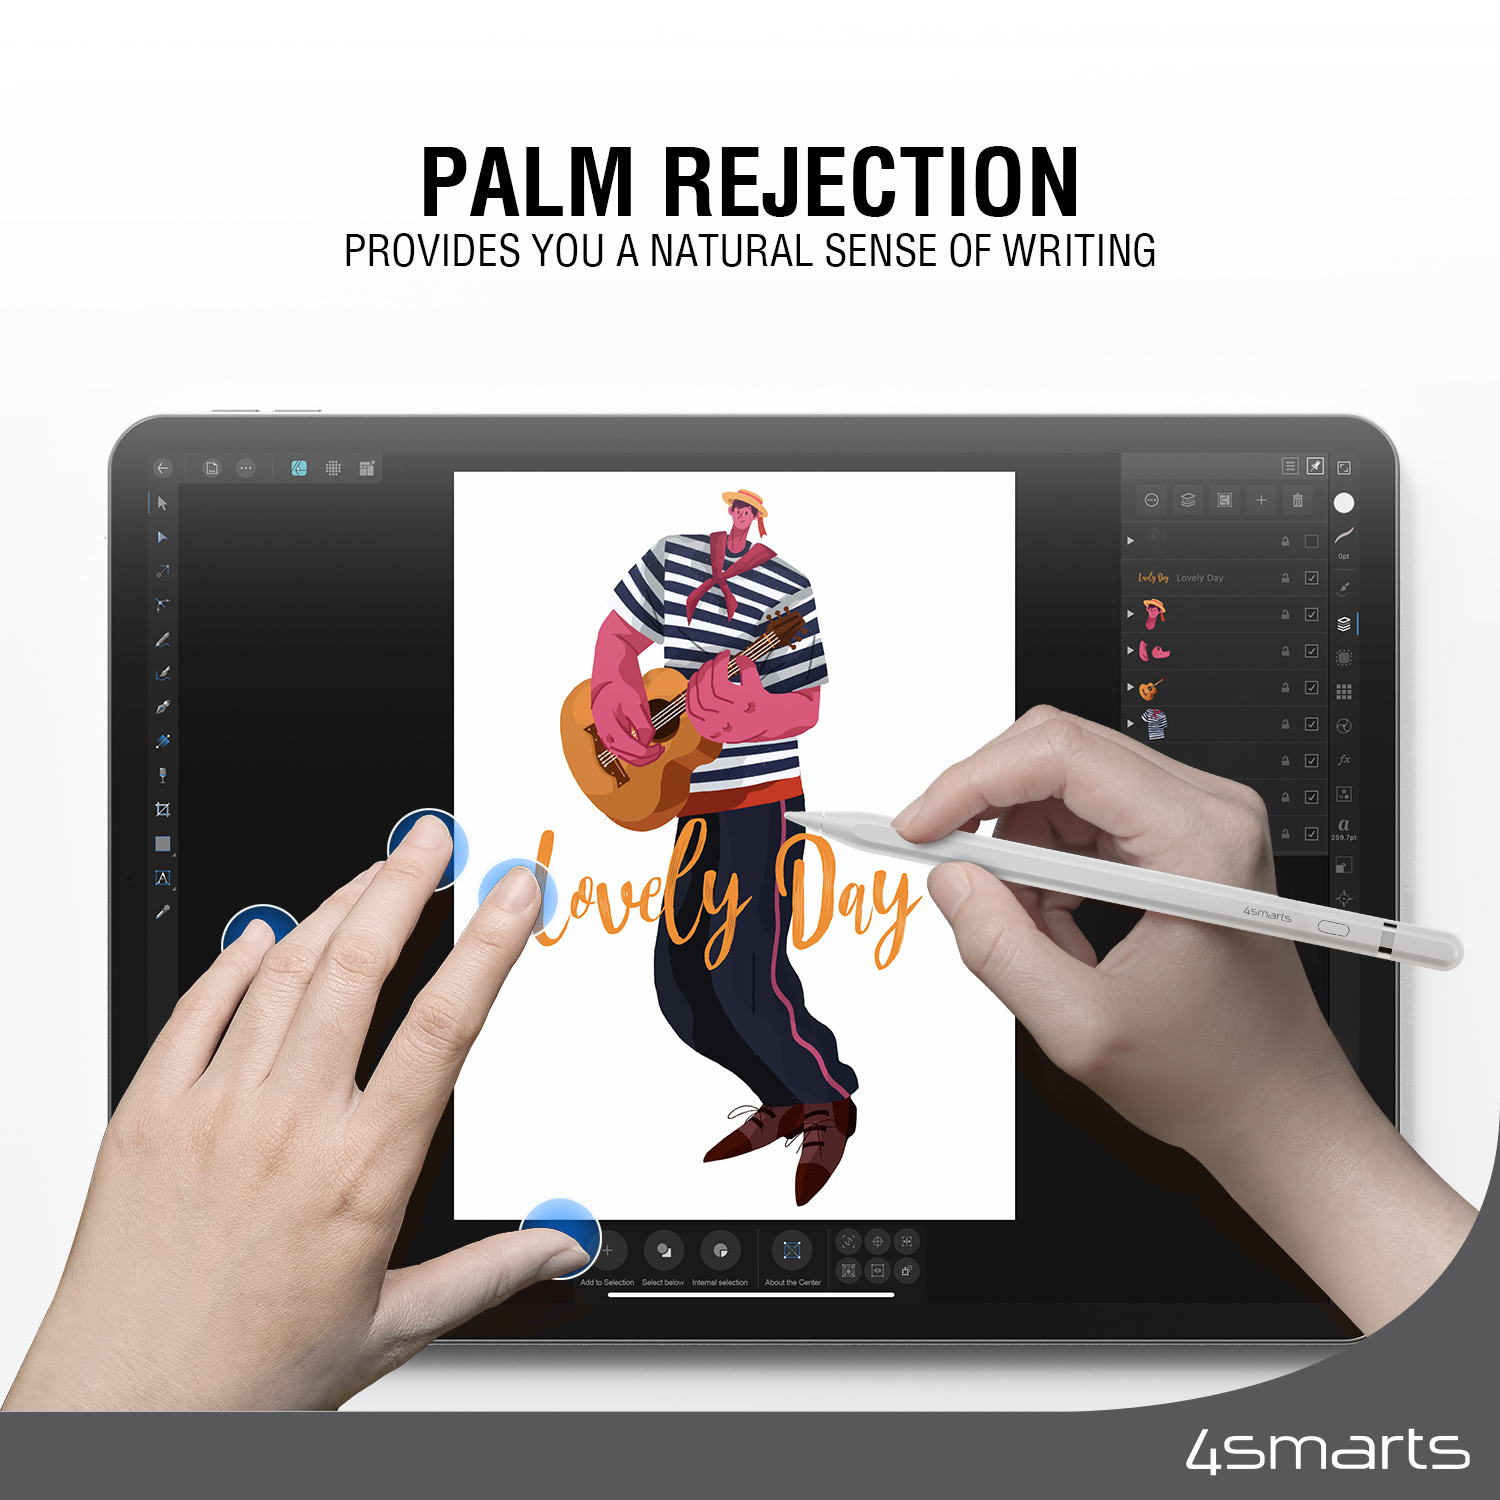 The 4smarts Pencil Pro 2 for iPad has palm rejection.